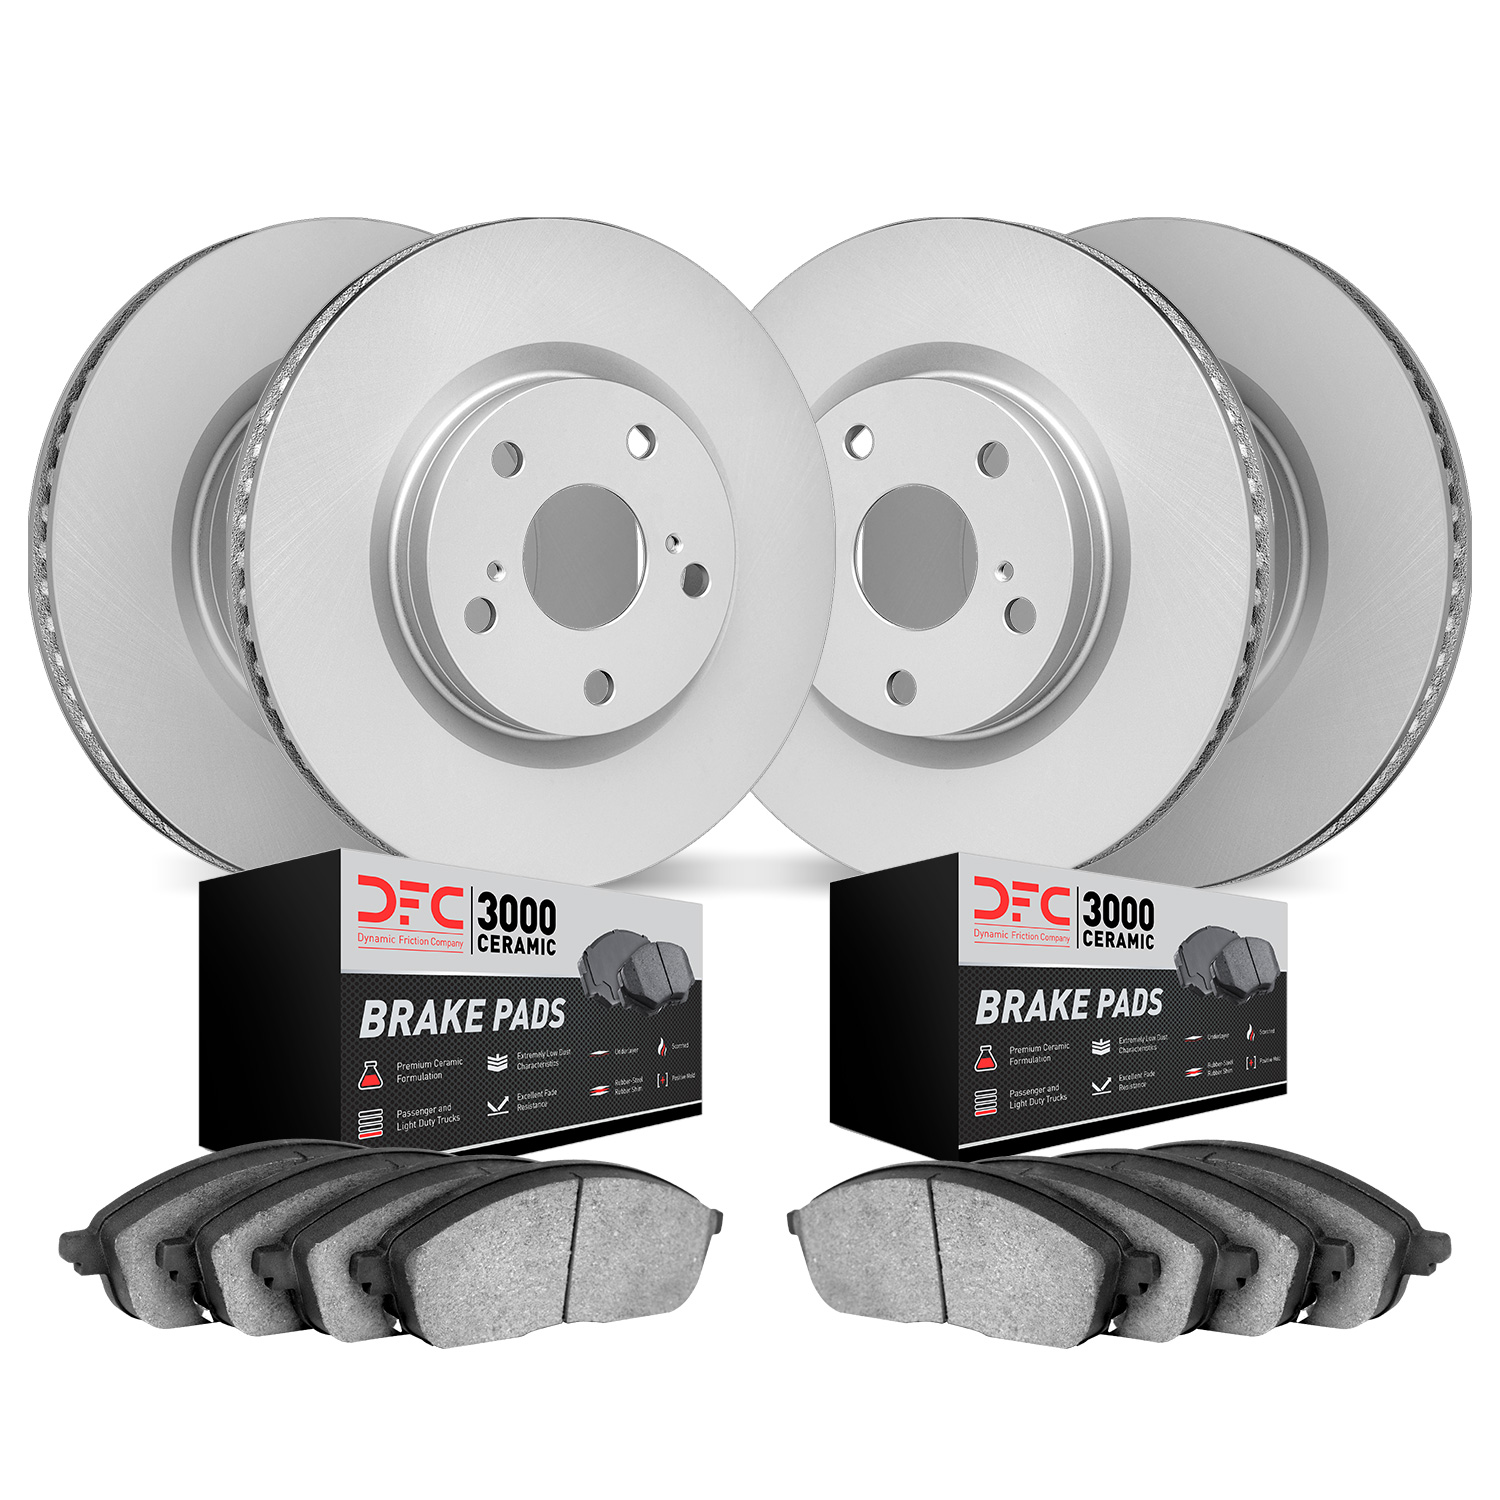 4304-31072 Geospec Brake Rotors with 3000-Series Ceramic Brake Pads Kit, Fits Select BMW, Position: Front and Rear